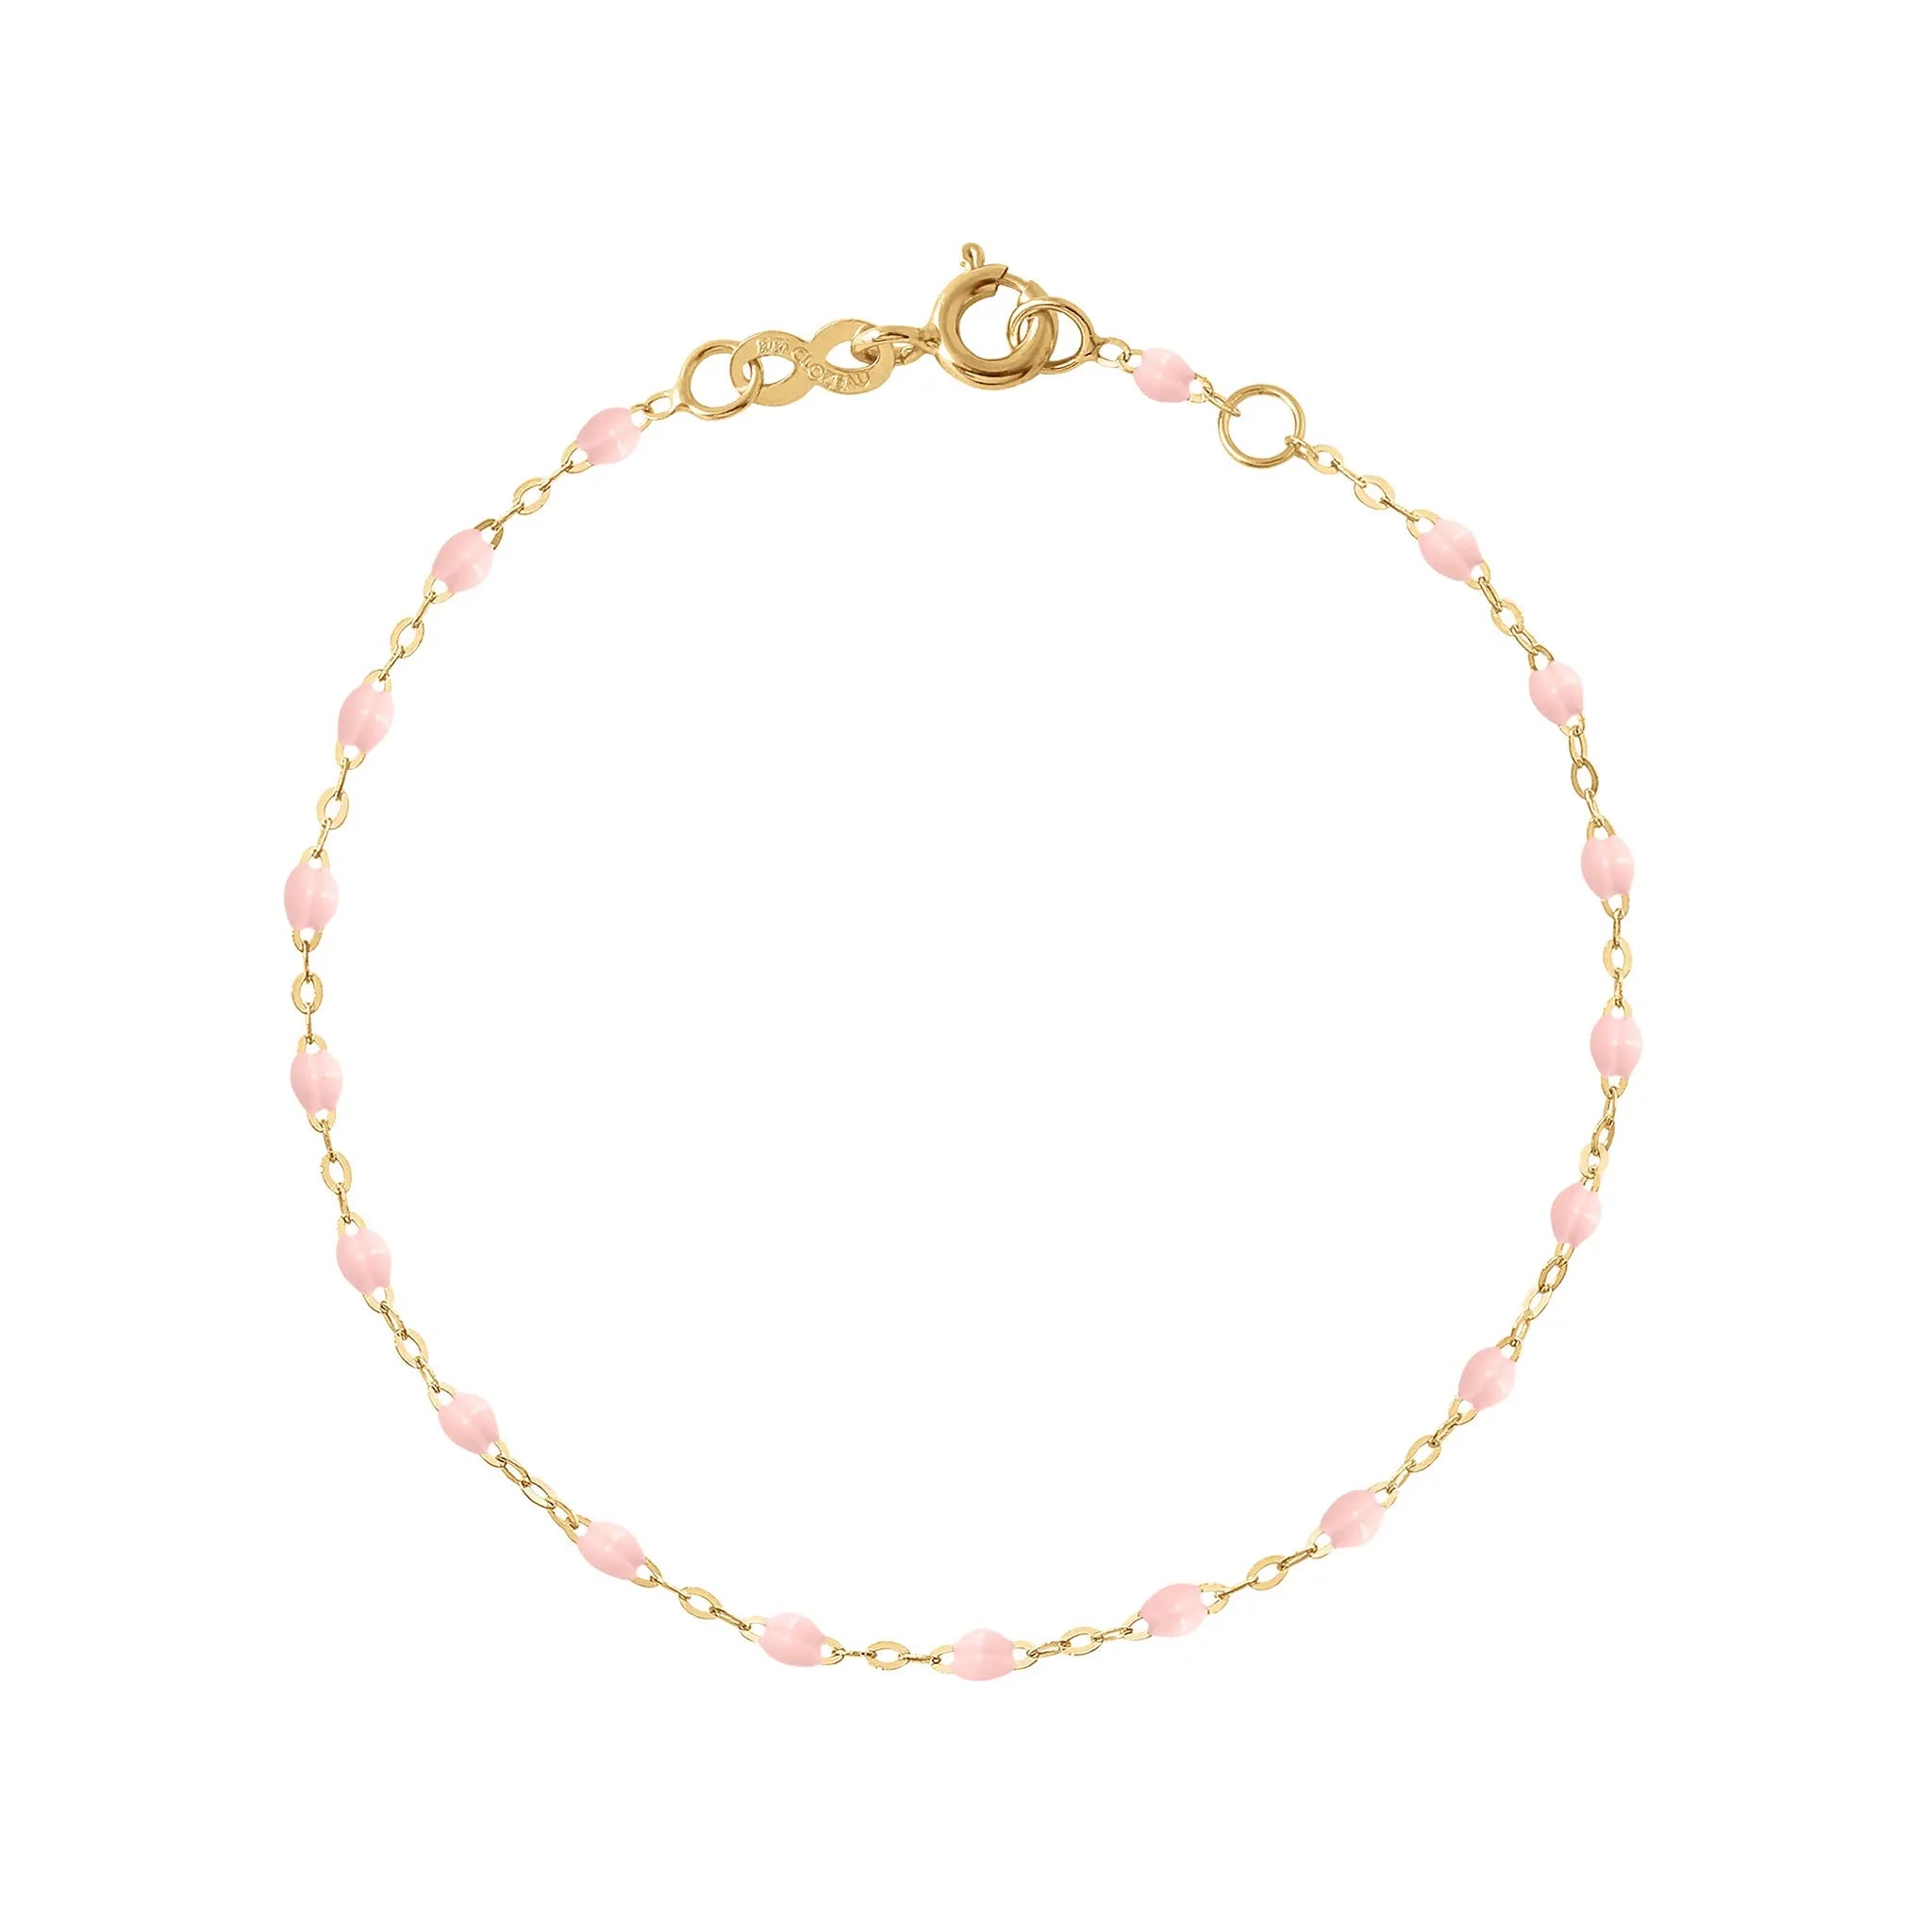 The Classic Gigi bracelet by gigi CLOZEAU features 18 carat Yellow Gold, and unique Baby Pink jewels for a simple, everyday look.   Each jewel is unique, artisanally made in their family-owned workshop. 18K yellow gold and resin. The bracelet measures 6.7 inches with adjustable clasp at 6.3 inches.